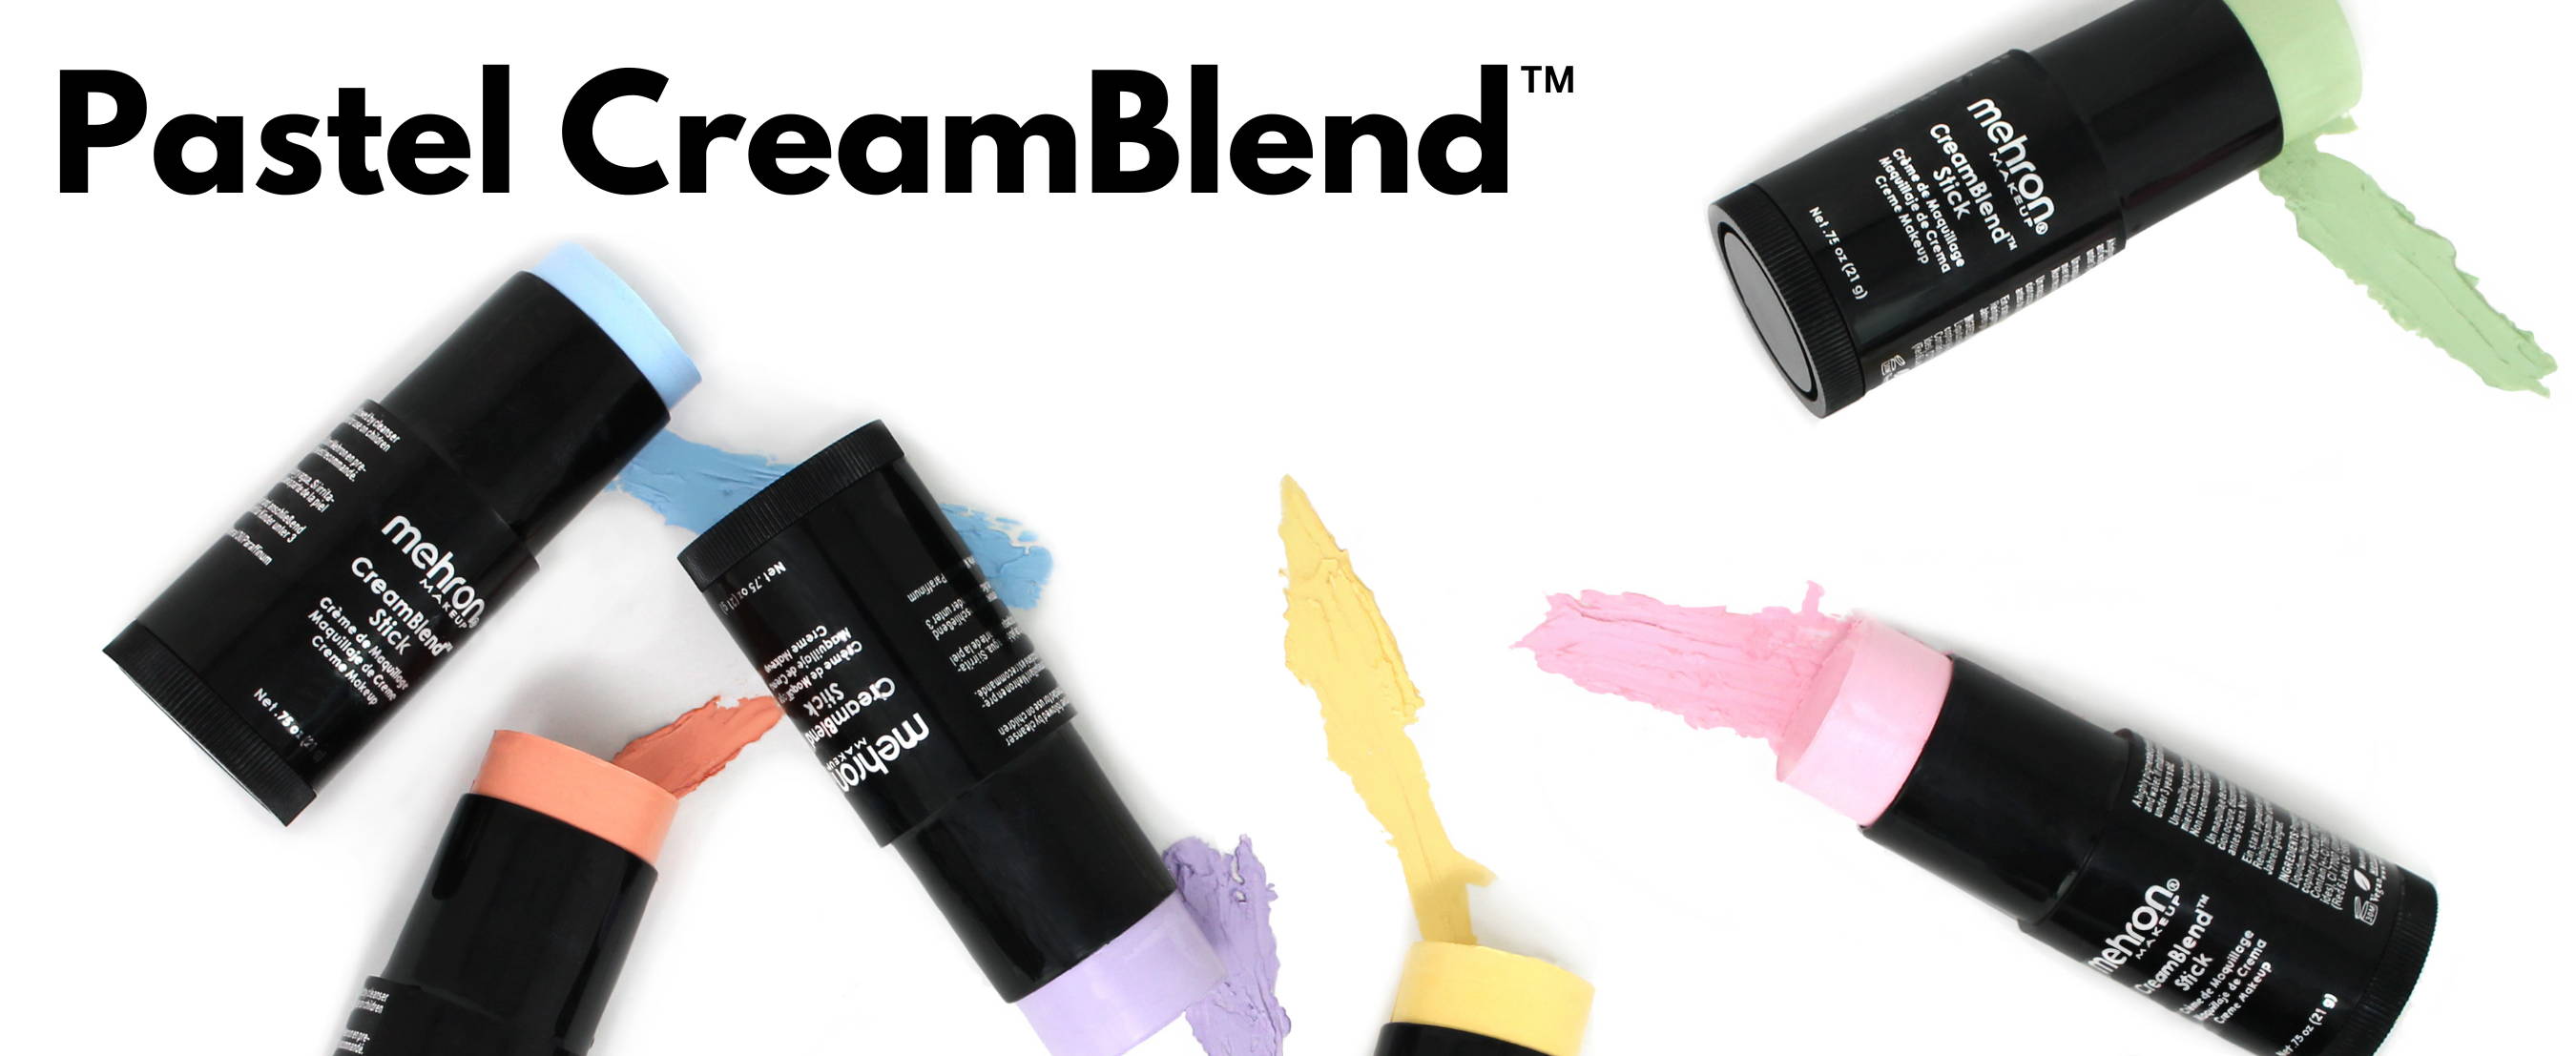 image of CreamBlend makeup in tubes of various colors.